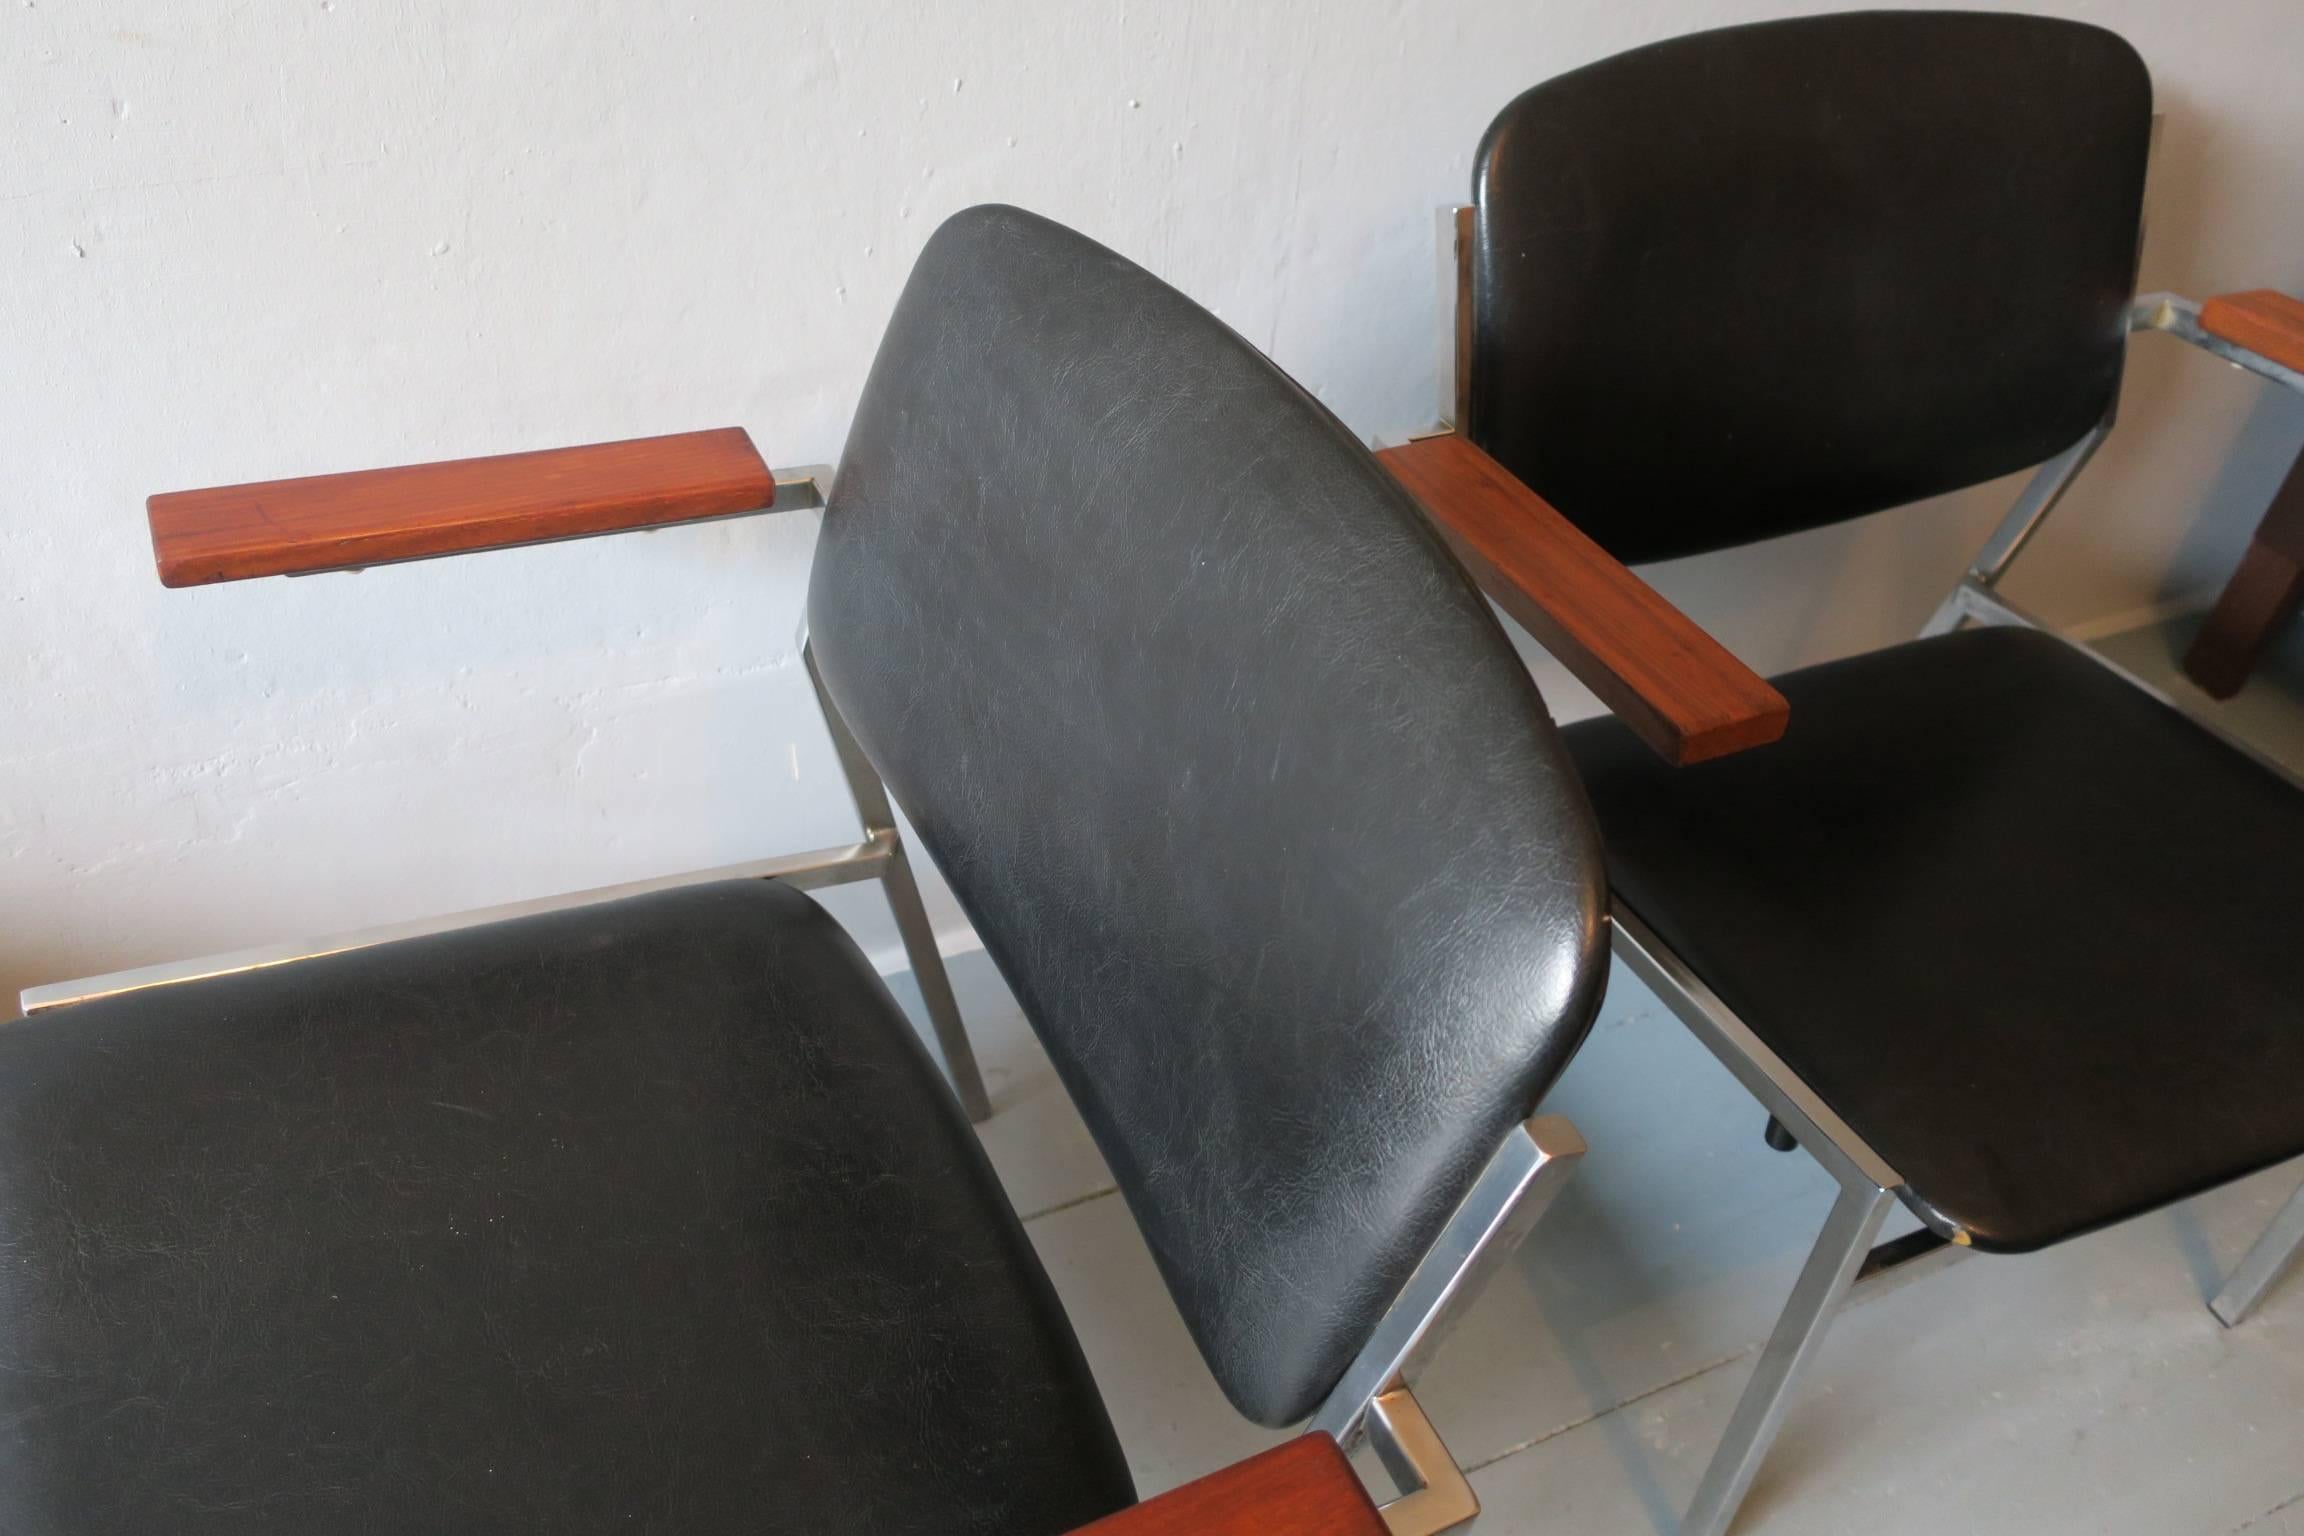 Pair of cocktail or lounge chairs with low seats, from the 1960s.
Made of steel with black faux leather seats and backs.

Attributed to Martin Visser.

Slightly differing sizes:
66 cm wide x 58 cm deep x 74 cm high x 39 cm seat height.
69 cm